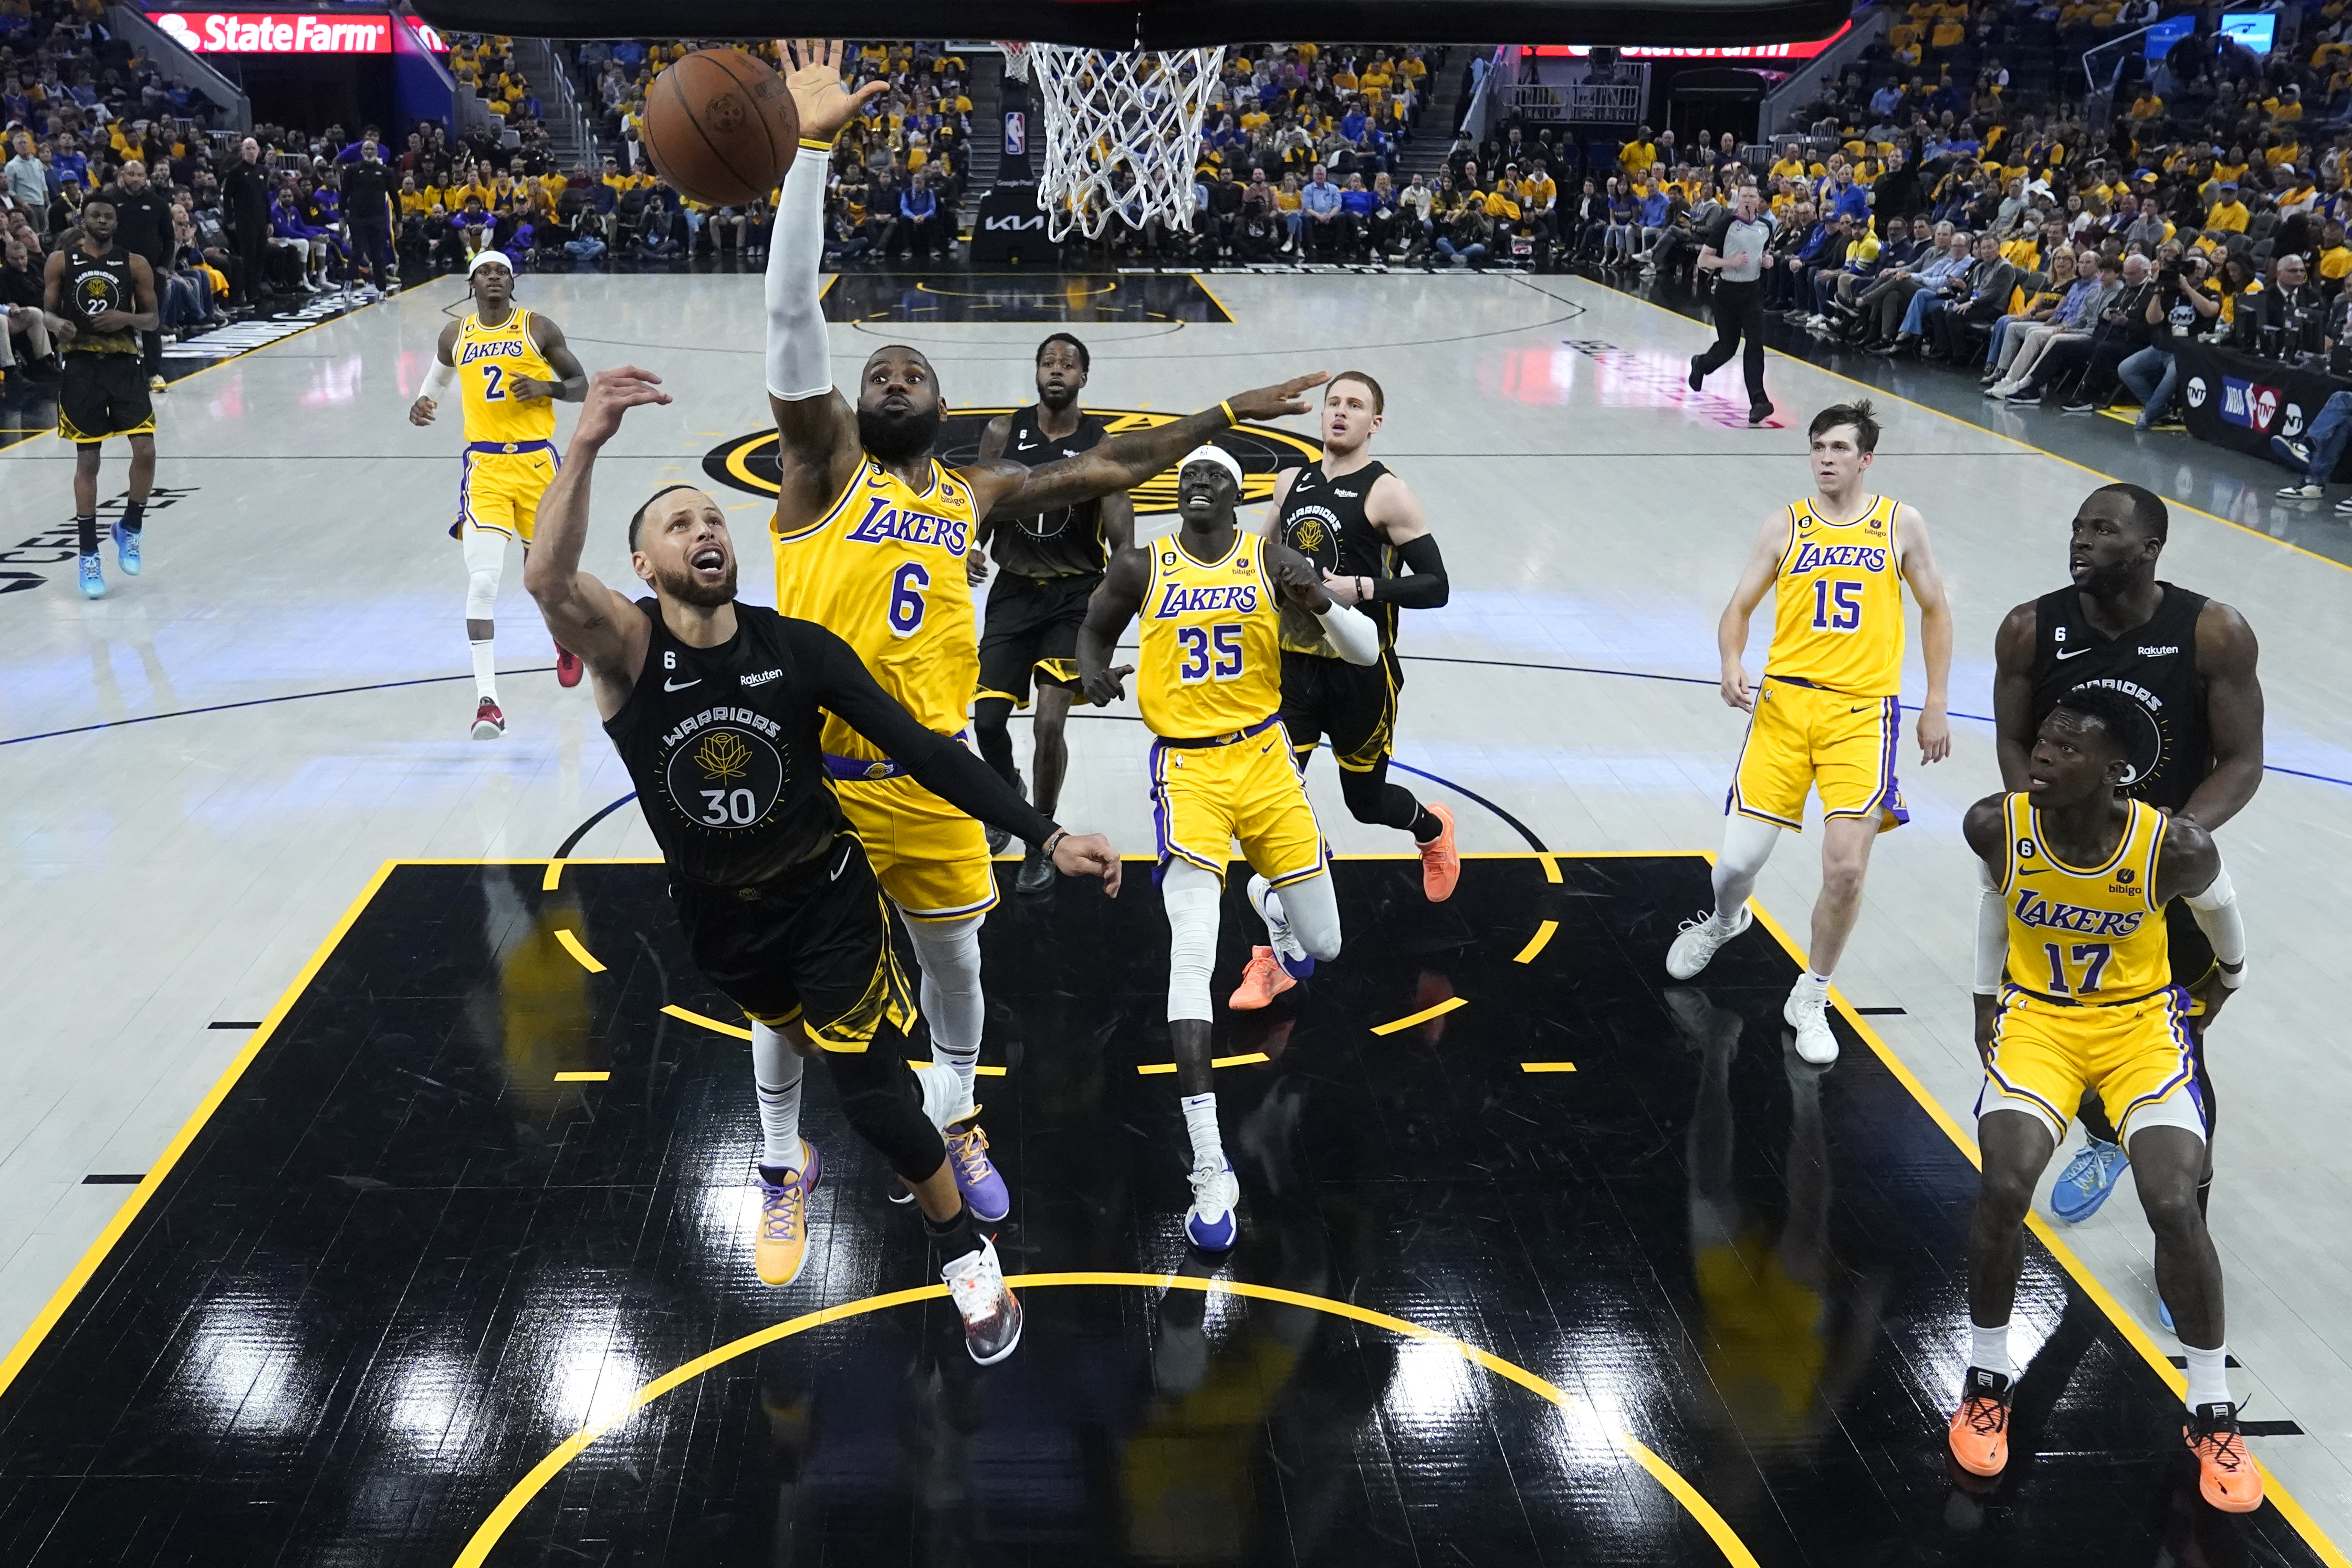 Can the Lakers vs. Warriors playoff series reignite the tension in